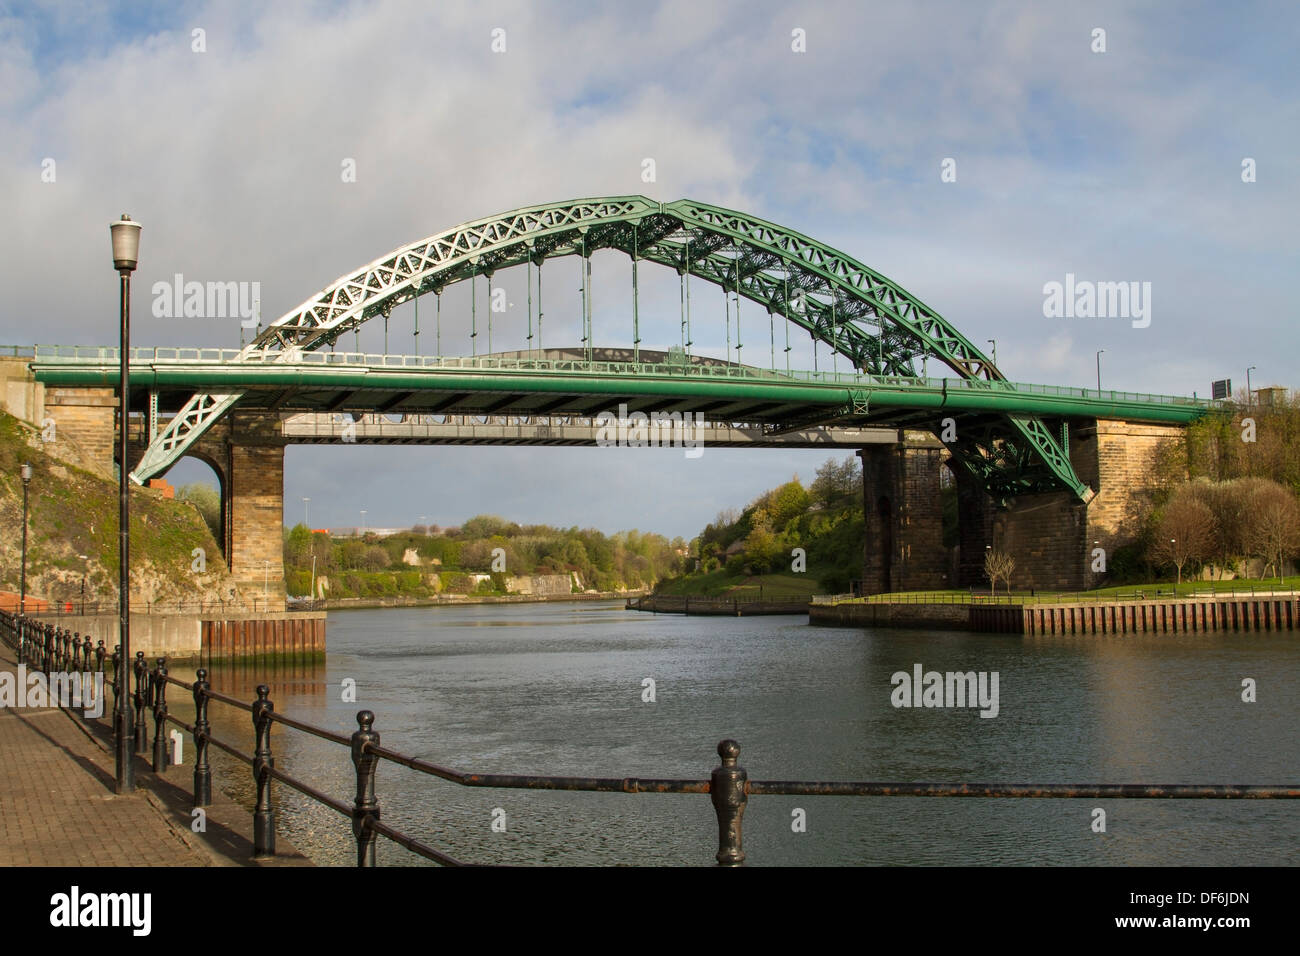 Wearmouth bridge across the River Wear in Sunderland with the rail bridge behind it, North East England Stock Photo